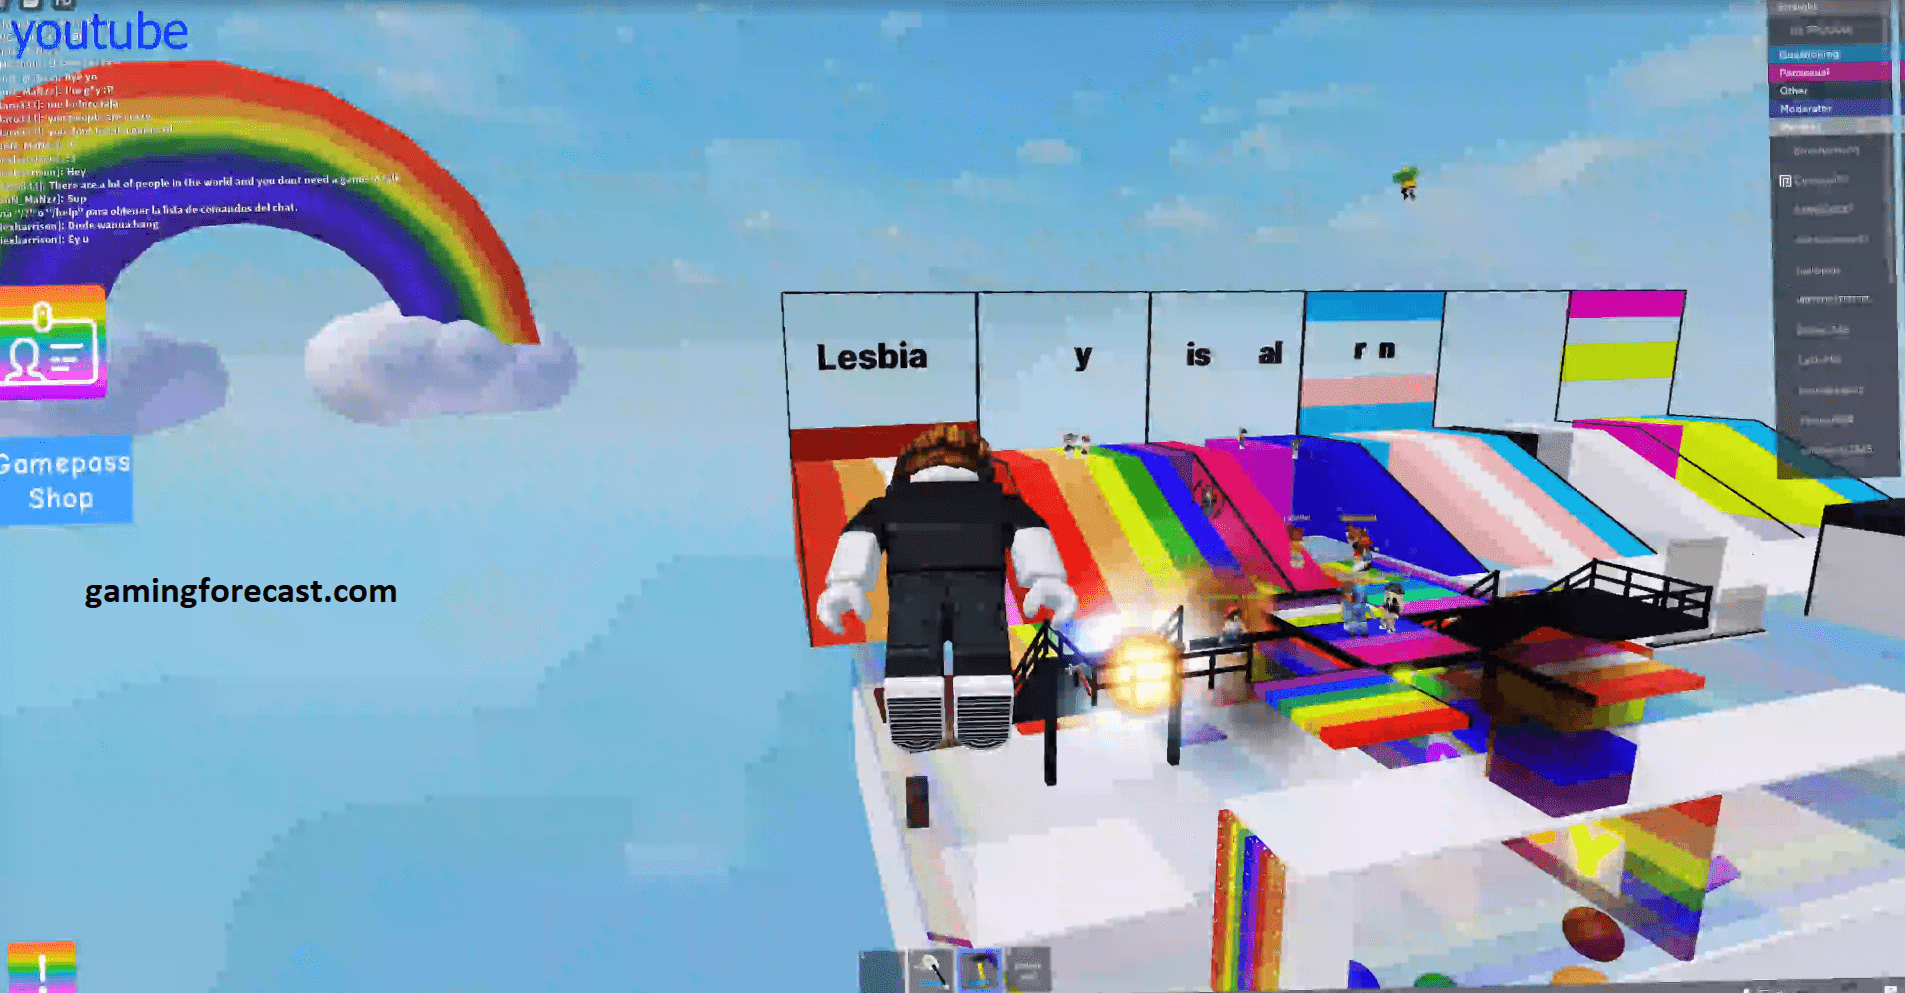 Roblox Hack Download Pc Destroy Lobby Fly Aimbot Scripts 2021 Gaming Forecast Download Free Online Game Hacks - how to hack a roblox account on pc